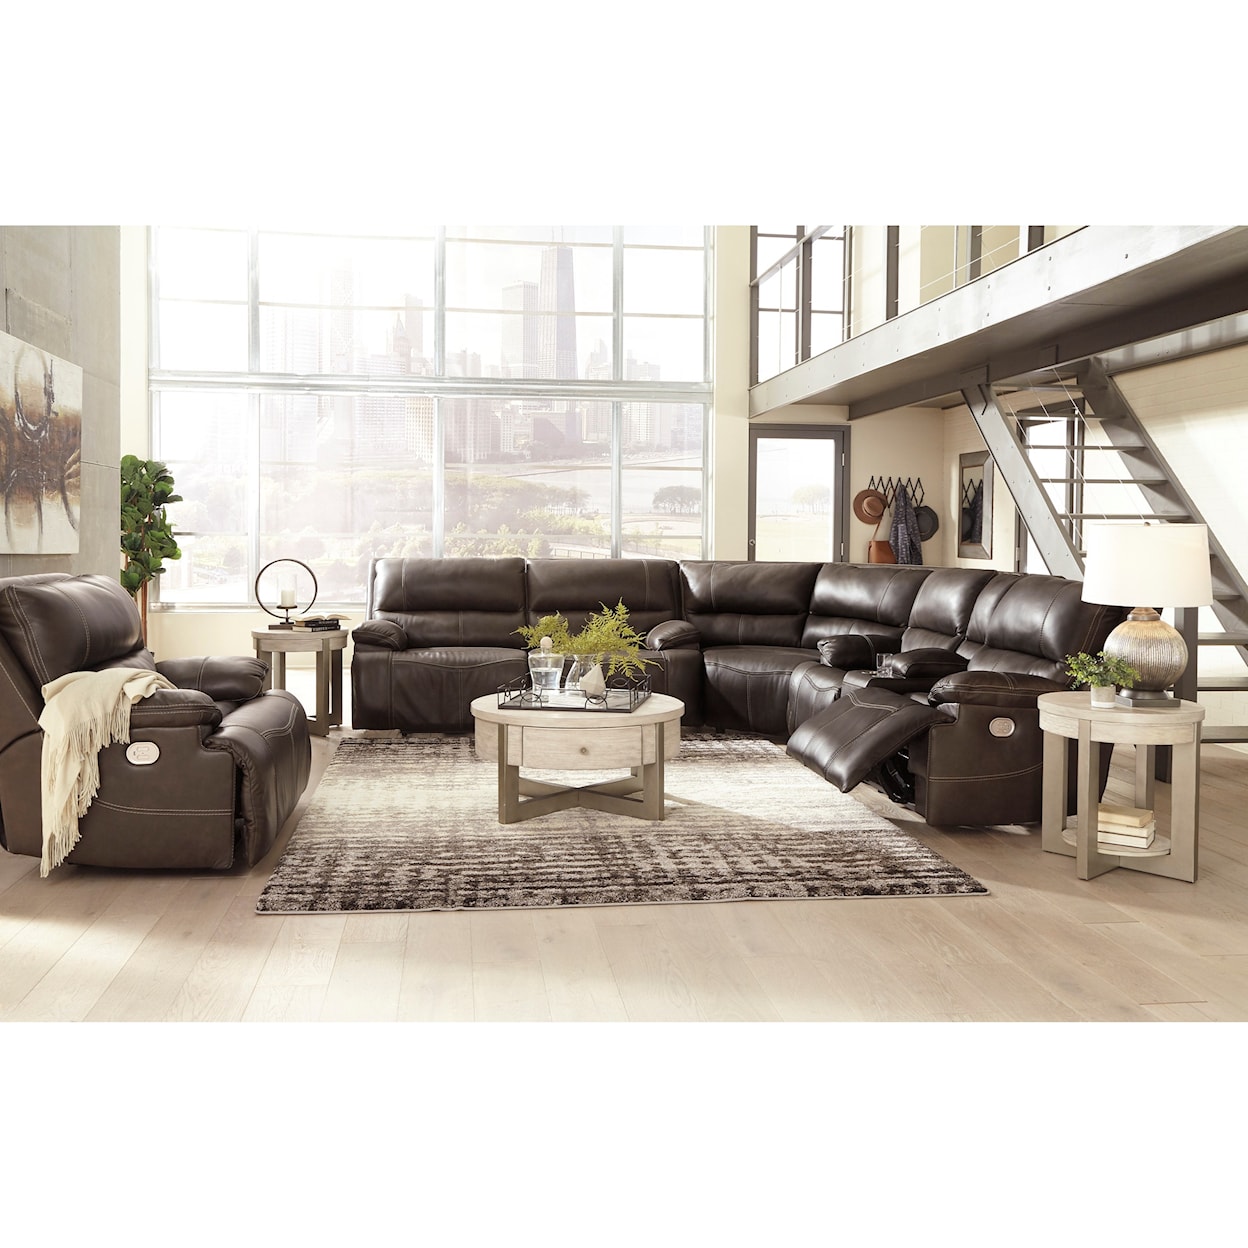 Signature Design by Ashley Ricmen Power Reclining Living Room Group